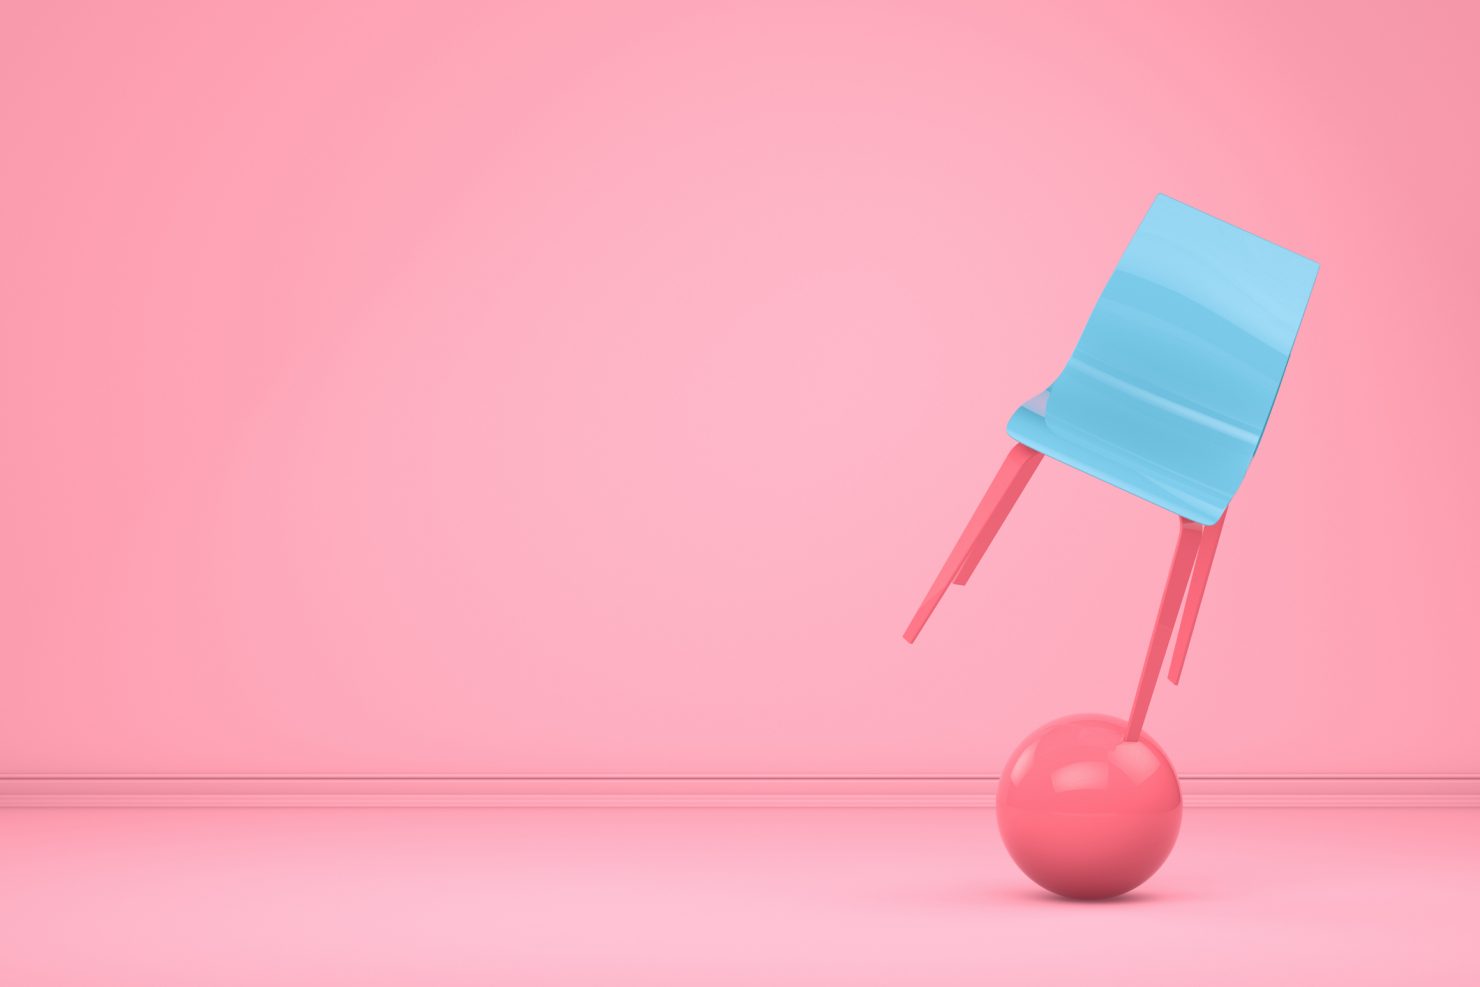 Picture of a blue and pink chair being balanced on top of an exercise ball to represent work-life balance.